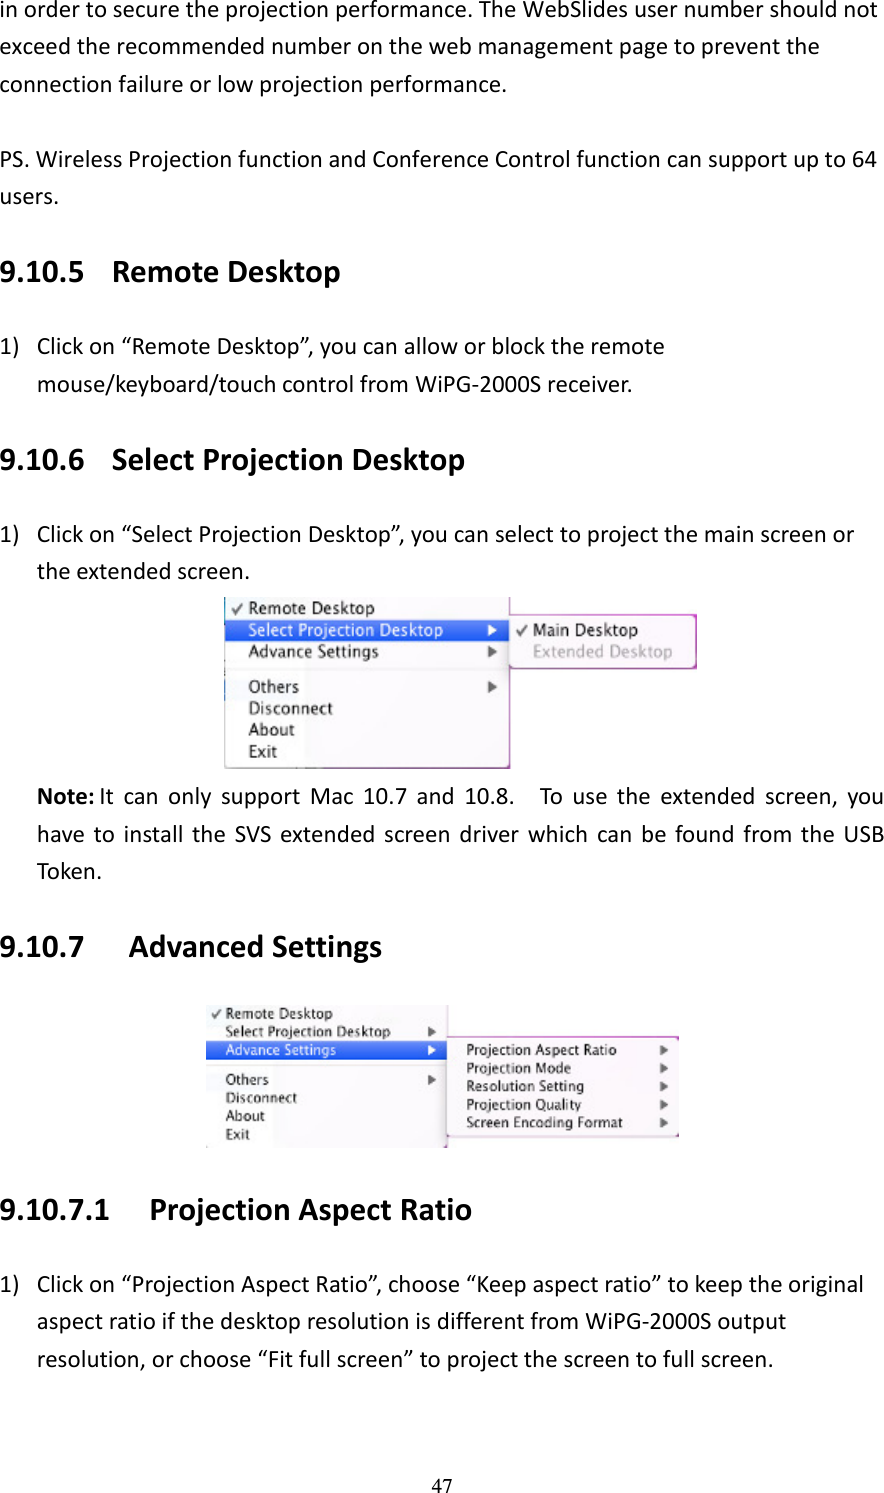   47 in order to secure the projection performance. The WebSlides user number should not exceed the recommended number on the web management page to prevent the connection failure or low projection performance.    PS. Wireless Projection function and Conference Control function can support up to 64 users. 9.10.5 Remote Desktop   1) Click on “Remote Desktop”, you can allow or block the remote mouse/keyboard/touch control from WiPG-2000S receiver. 9.10.6 Select Projection Desktop 1) Click on “Select Projection Desktop”, you can select to project the main screen or the extended screen.  Note: It  can  only  support  Mac  10.7  and  10.8.    To  use  the  extended  screen,  you have  to  install  the  SVS  extended  screen driver  which  can be  found  from the  USB Token. 9.10.7   Advanced Settings  9.10.7.1 Projection Aspect Ratio 1) Click on “Projection Aspect Ratio”, choose “Keep aspect ratio” to keep the original aspect ratio if the desktop resolution is different from WiPG-2000S output resolution, or choose “Fit full screen” to project the screen to full screen.     